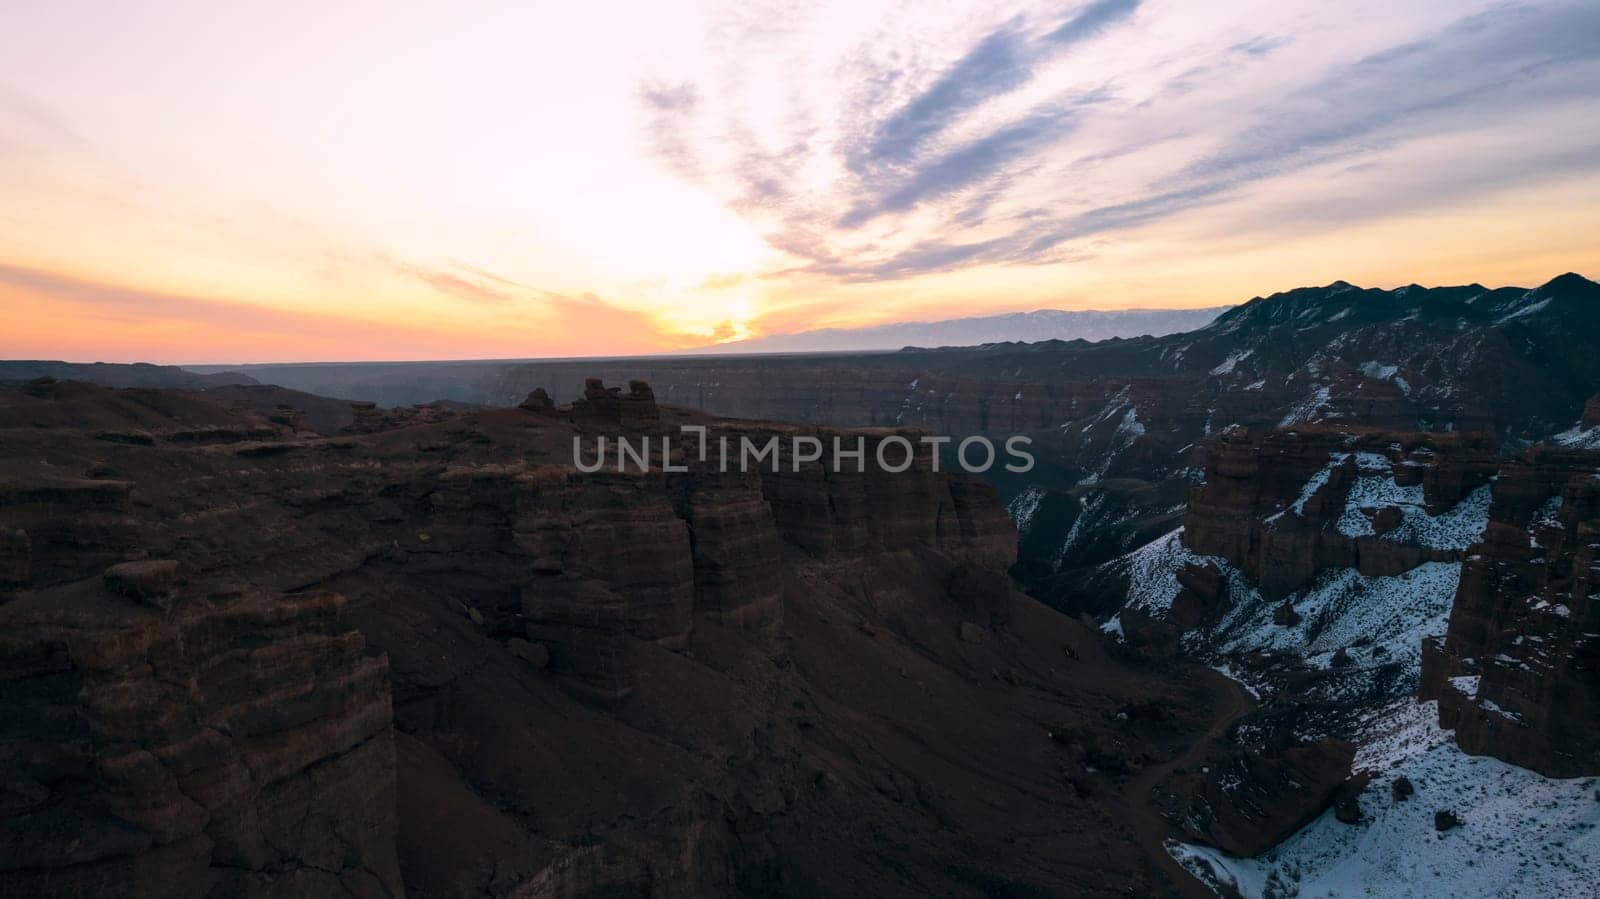 Charyn Grand Canyon with orange rock walls. Aerial view from the drone of the steep canyon walls, cracks and tunnels. There is snow in places. Beautiful sunset and sunrise. Brother of the Grand Canyon